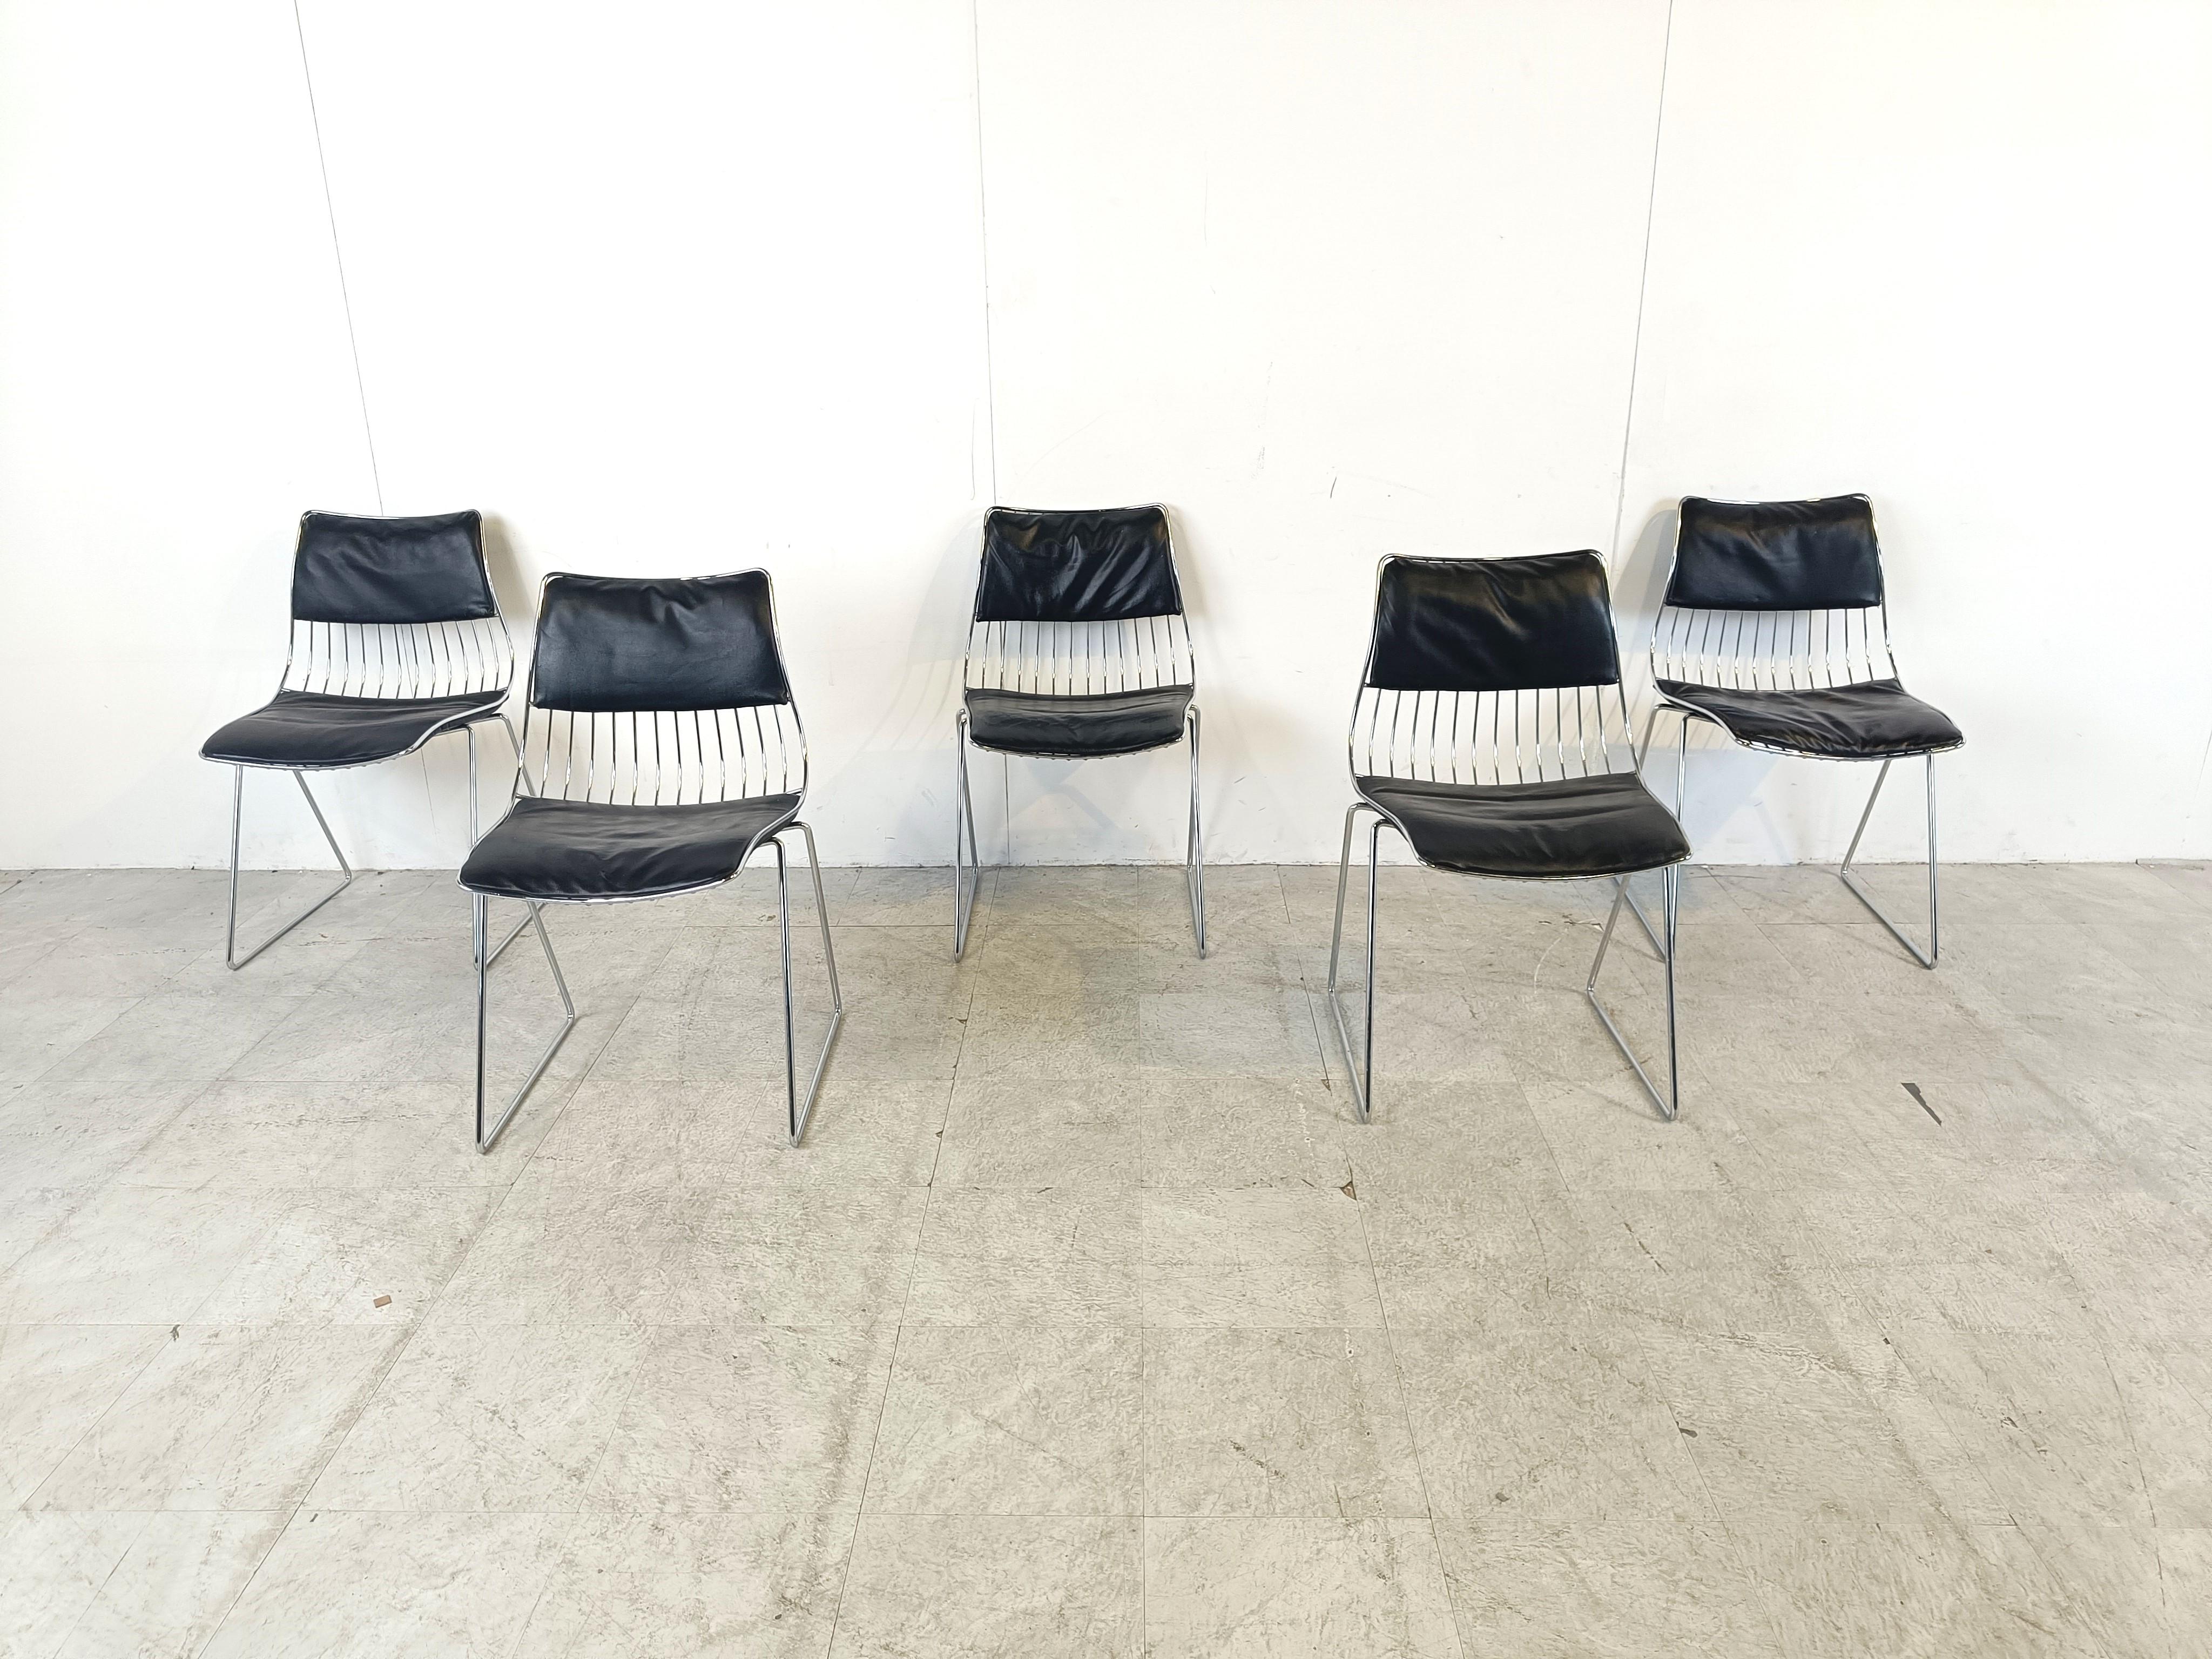 Set of 5 stackable dining chairs designed by Rudi Verelst.

The have a heavy wired chrome frame with black leather upholstery.

The chairs are in a very good condition with no damages.

They sit well and have a sturdy design.

1970s -